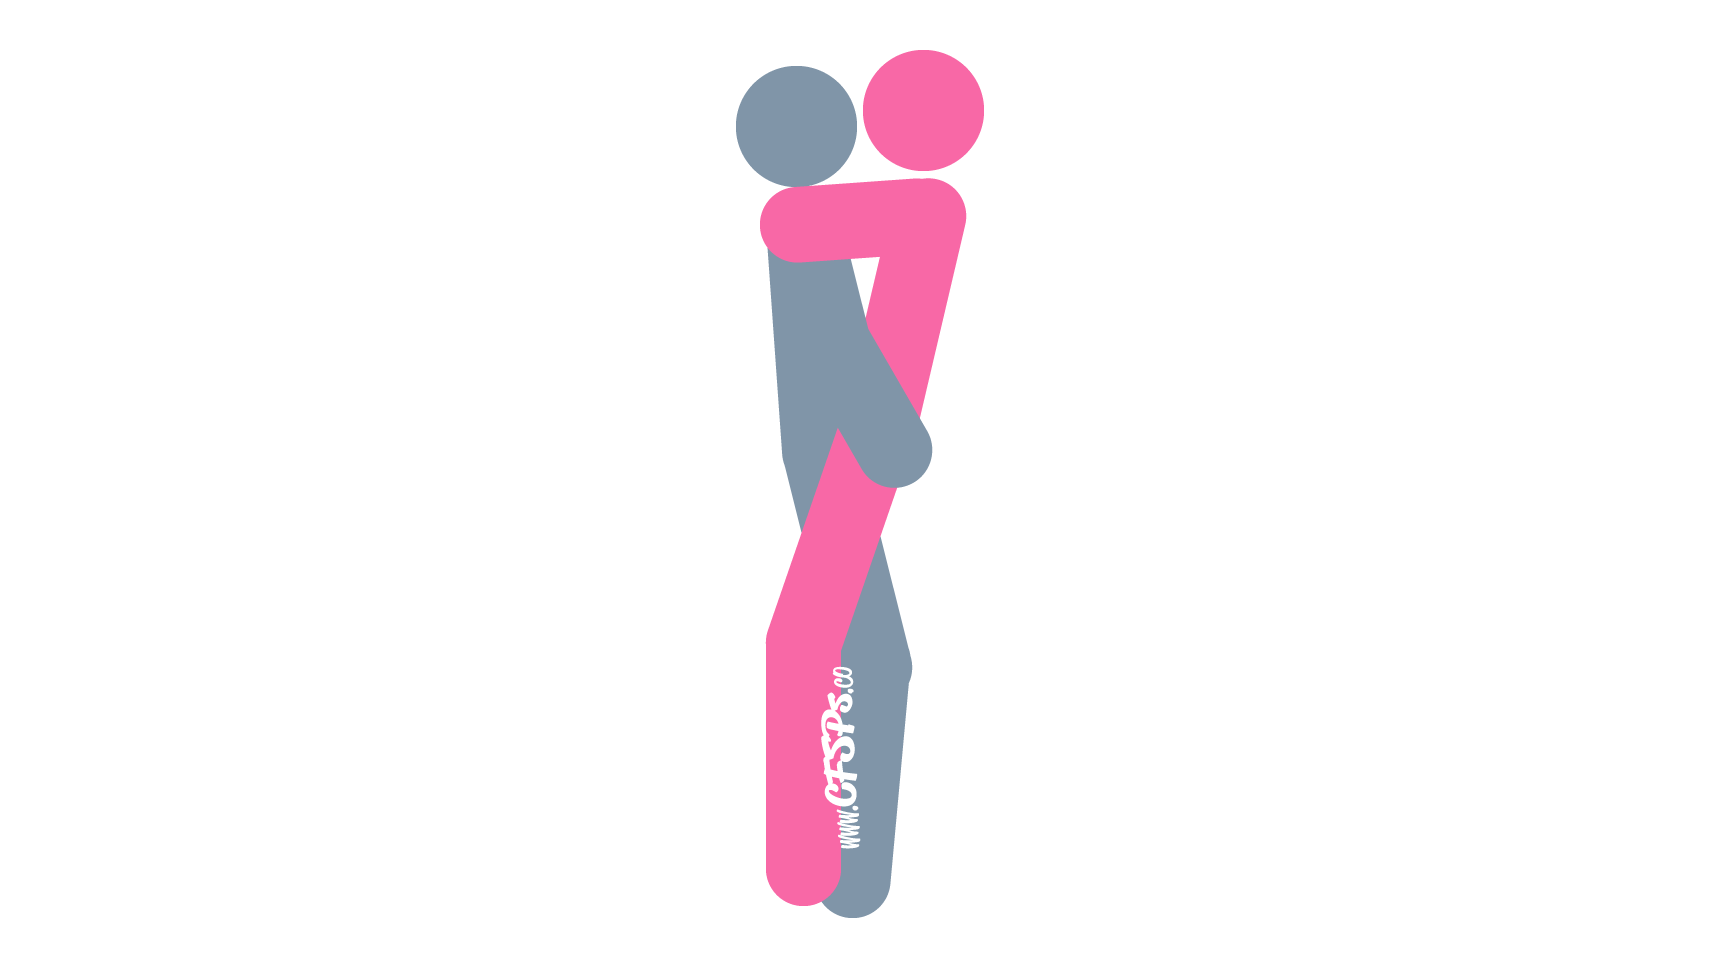 This stick figure image depicts a man and woman having sex in the Extension Cord sex position. The man is standing with his feet together. The woman is standing before him and straddling his pelvis with her feet on the outside of his or just behind them. The woman has her arms wrapped around his neck, and the man is holding onto her butt.